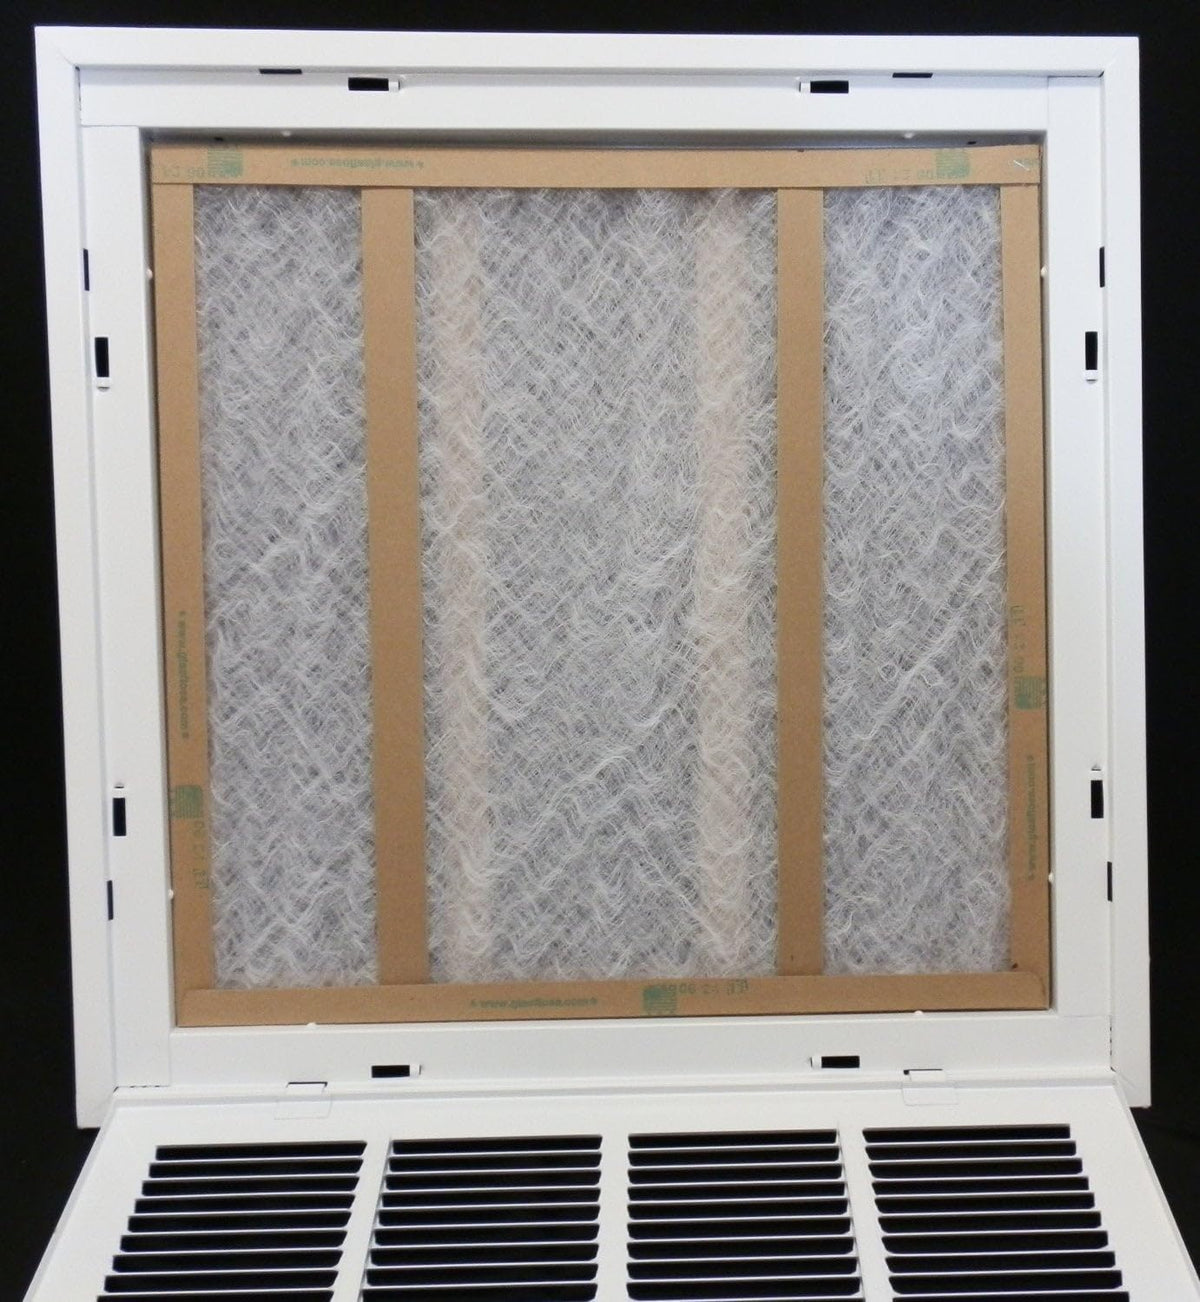 24&quot; X 20&quot; Steel Return Air Filter Grille for 1&quot; Filter - Removable Frame - * Filter Included * [Outer Dimensions: 26 5/8&quot; X 22 5/8&quot;]